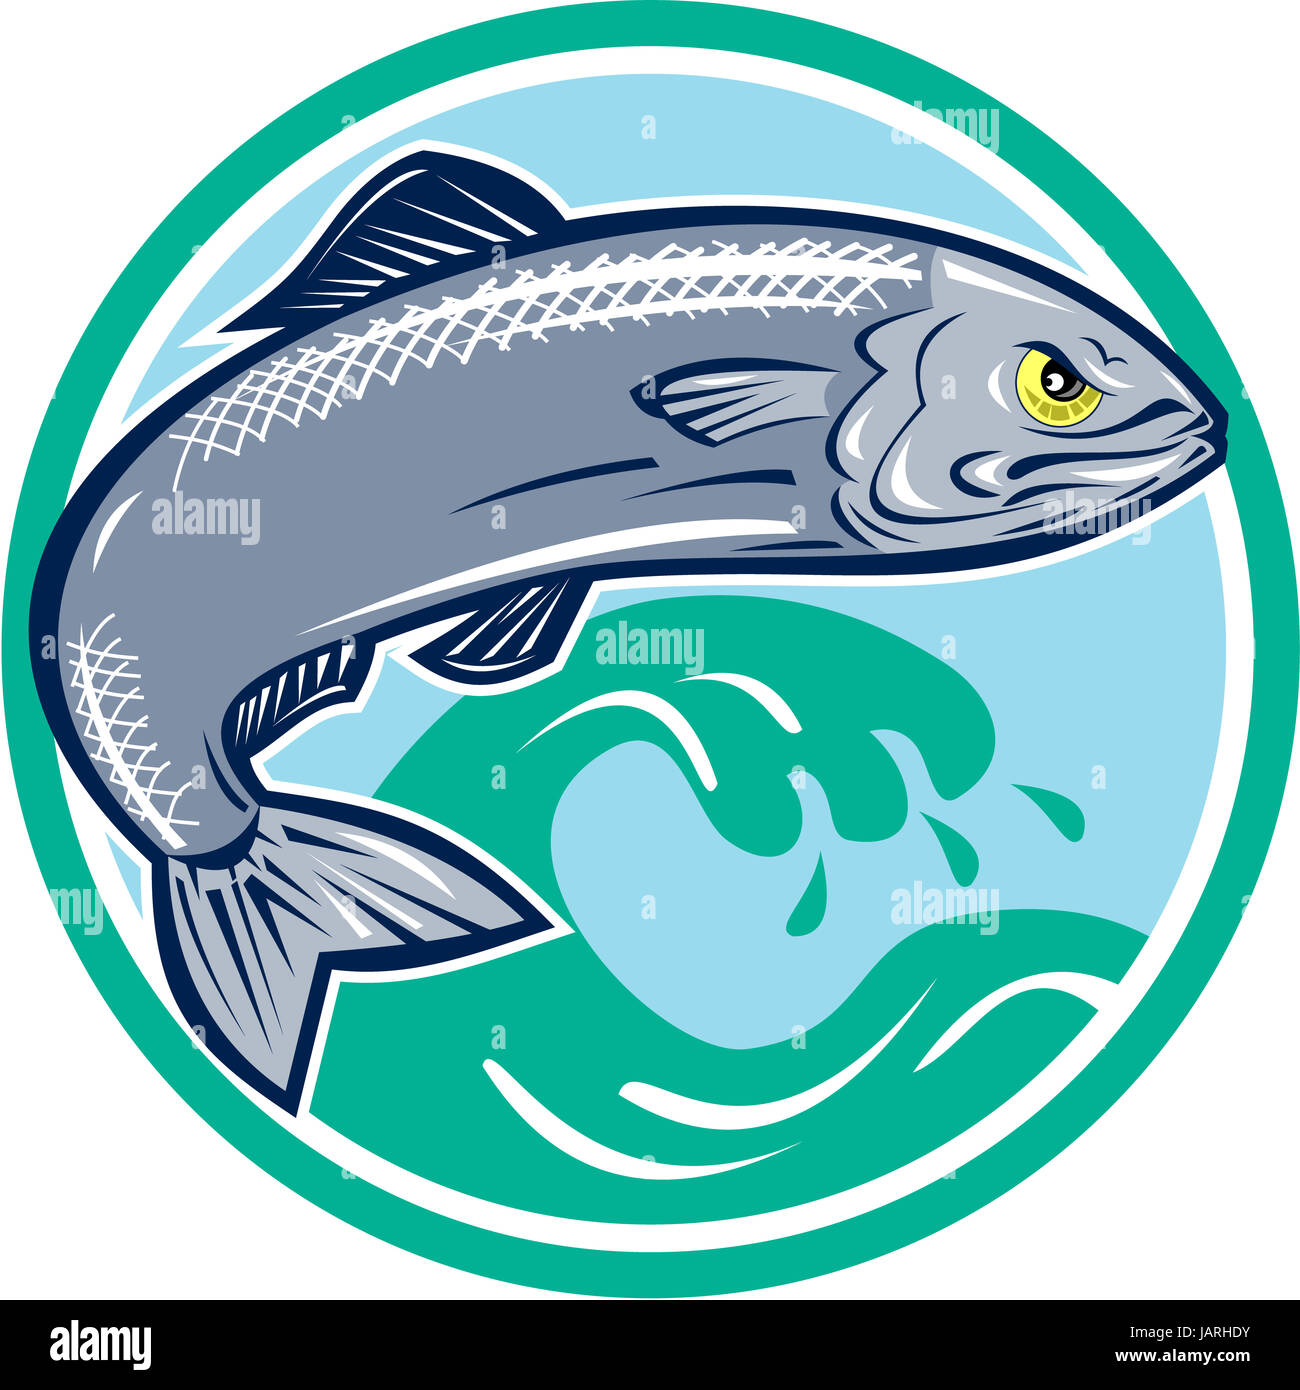 Illustration of an angry sardine fish jumping with waves in background set inside circle on isolated white background retro style. Stock Photo